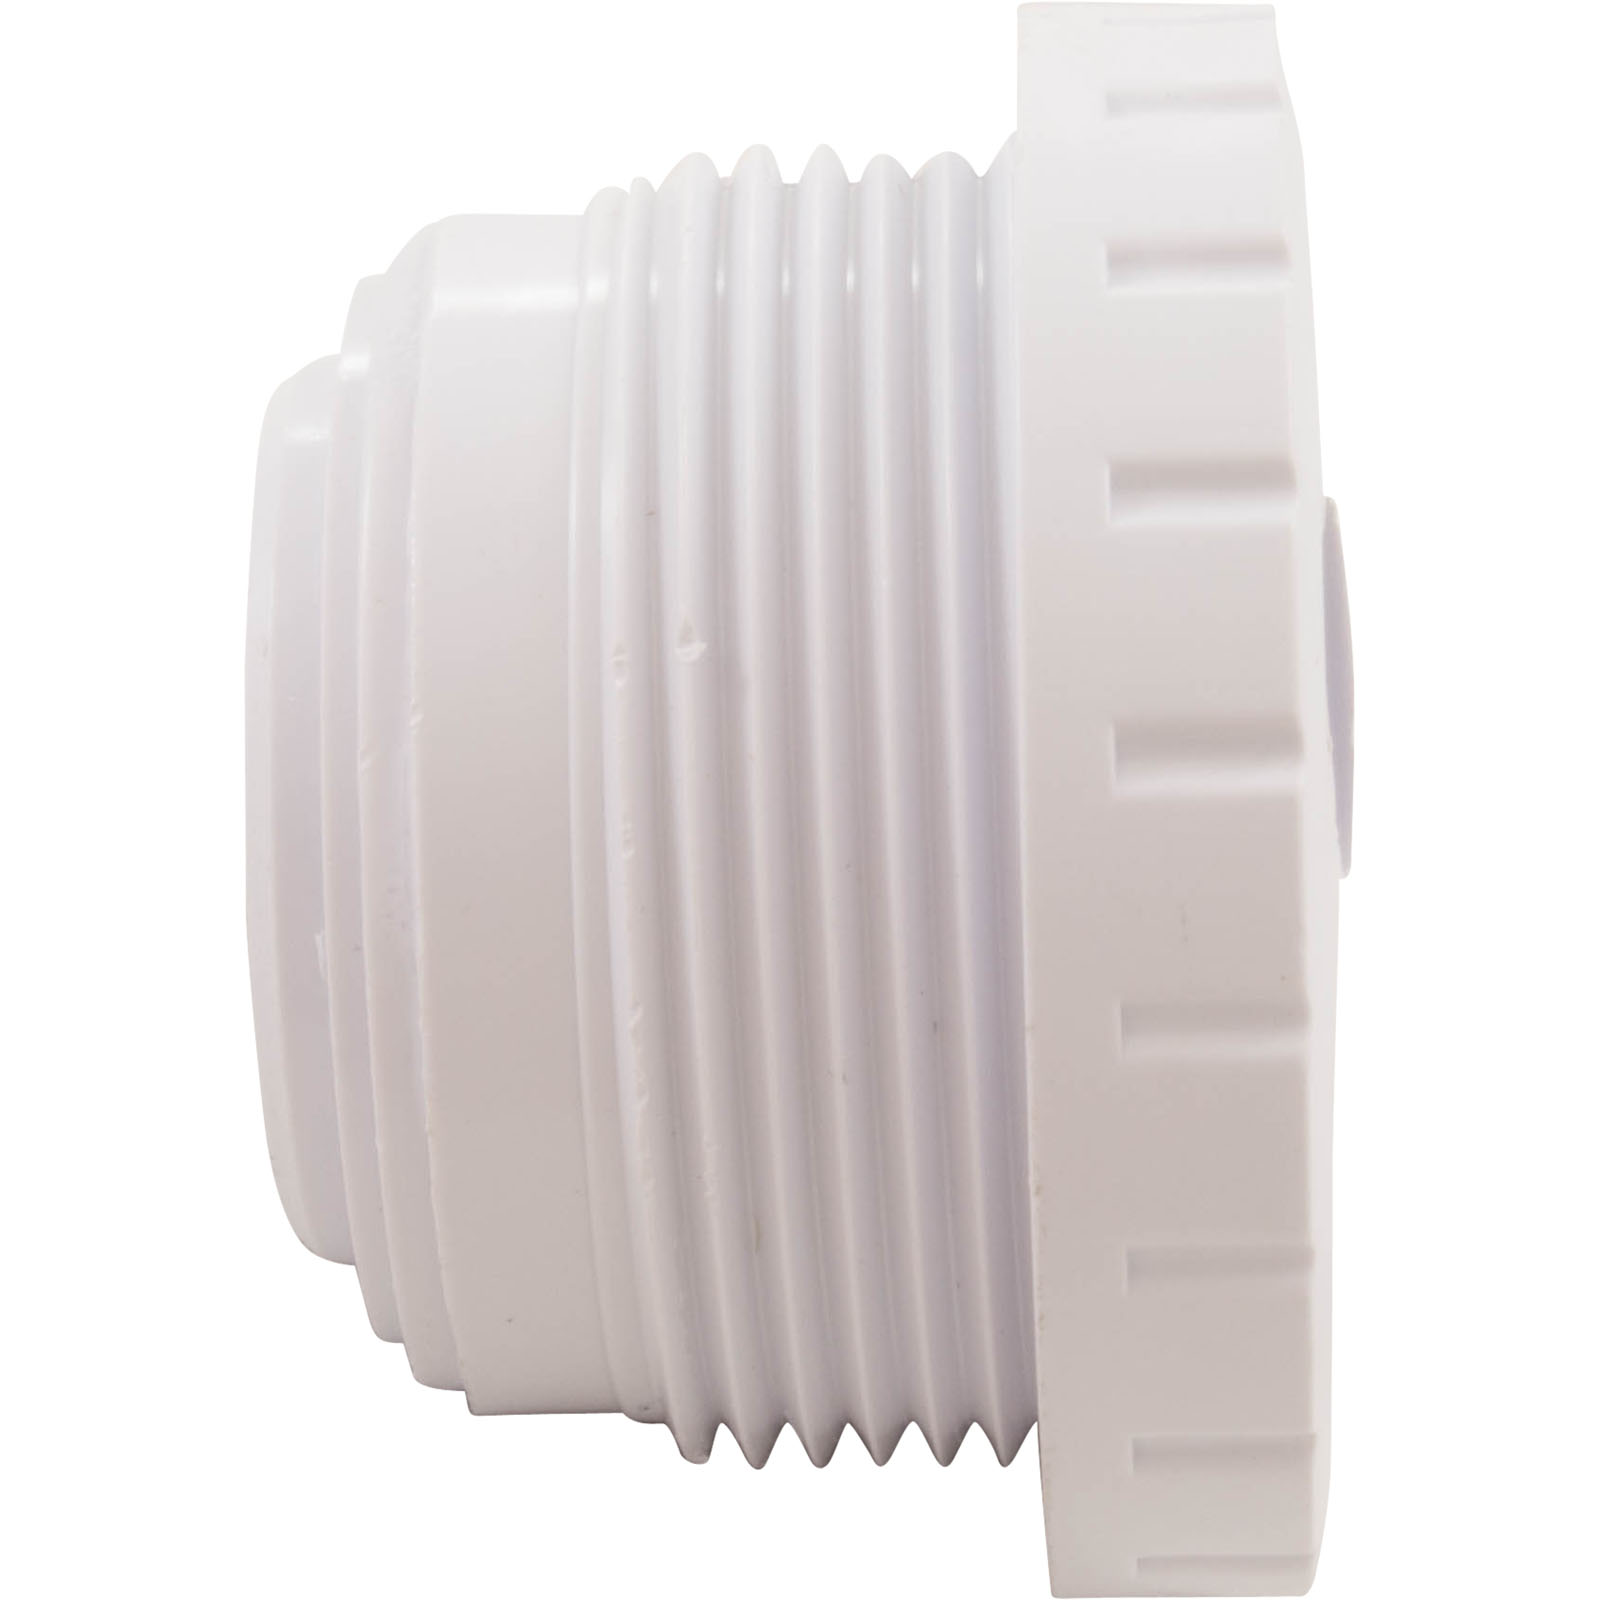 Picture of 23315-030-000 Jet Intl CMP Spa Master Pulsator Ribbed White